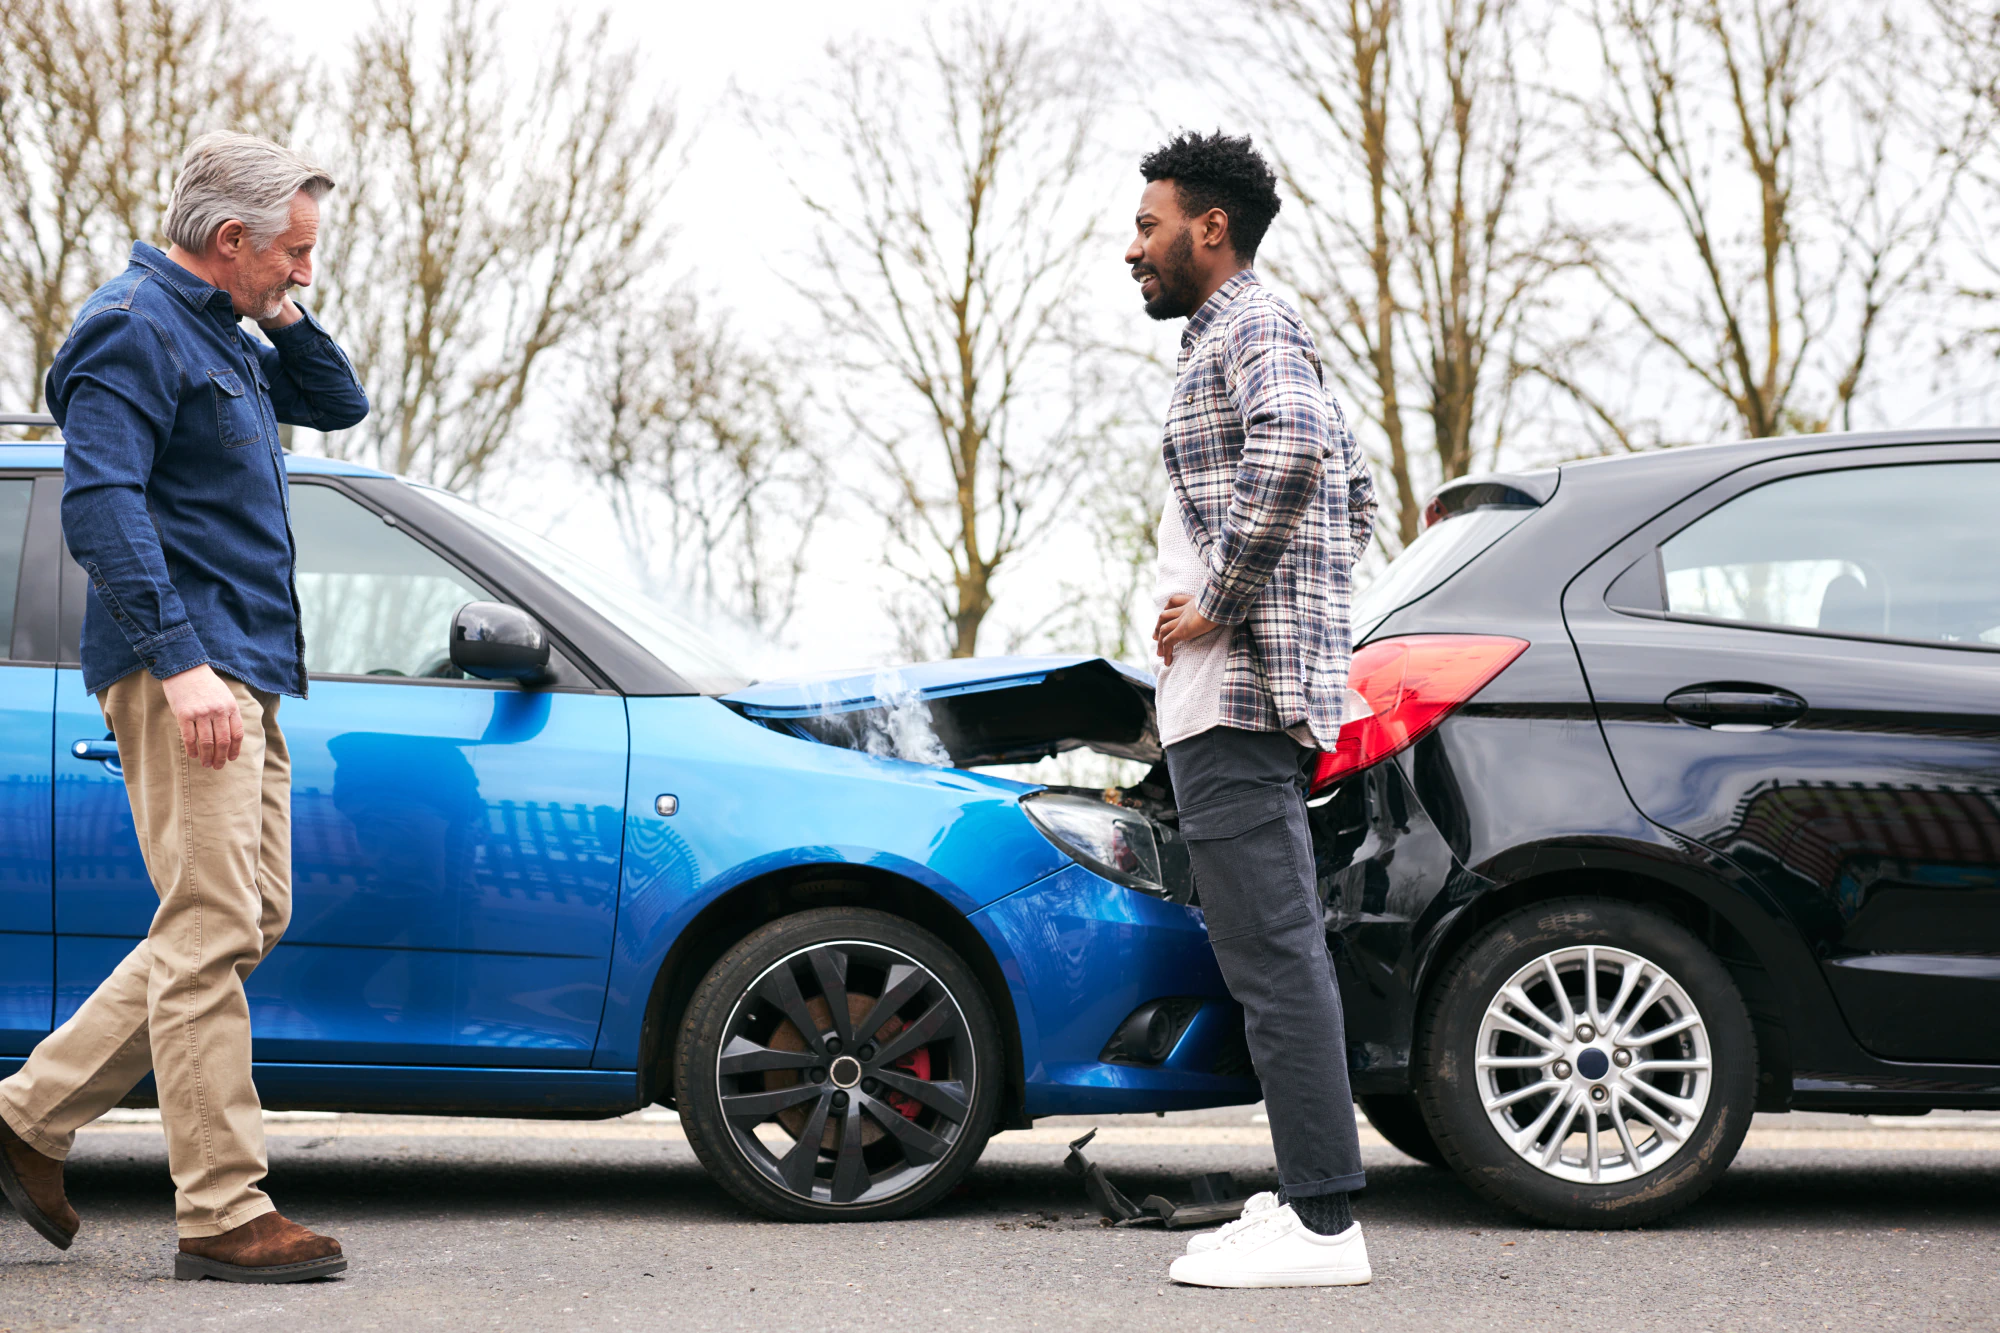 Two drivers look at their cars after a rear-end accident.